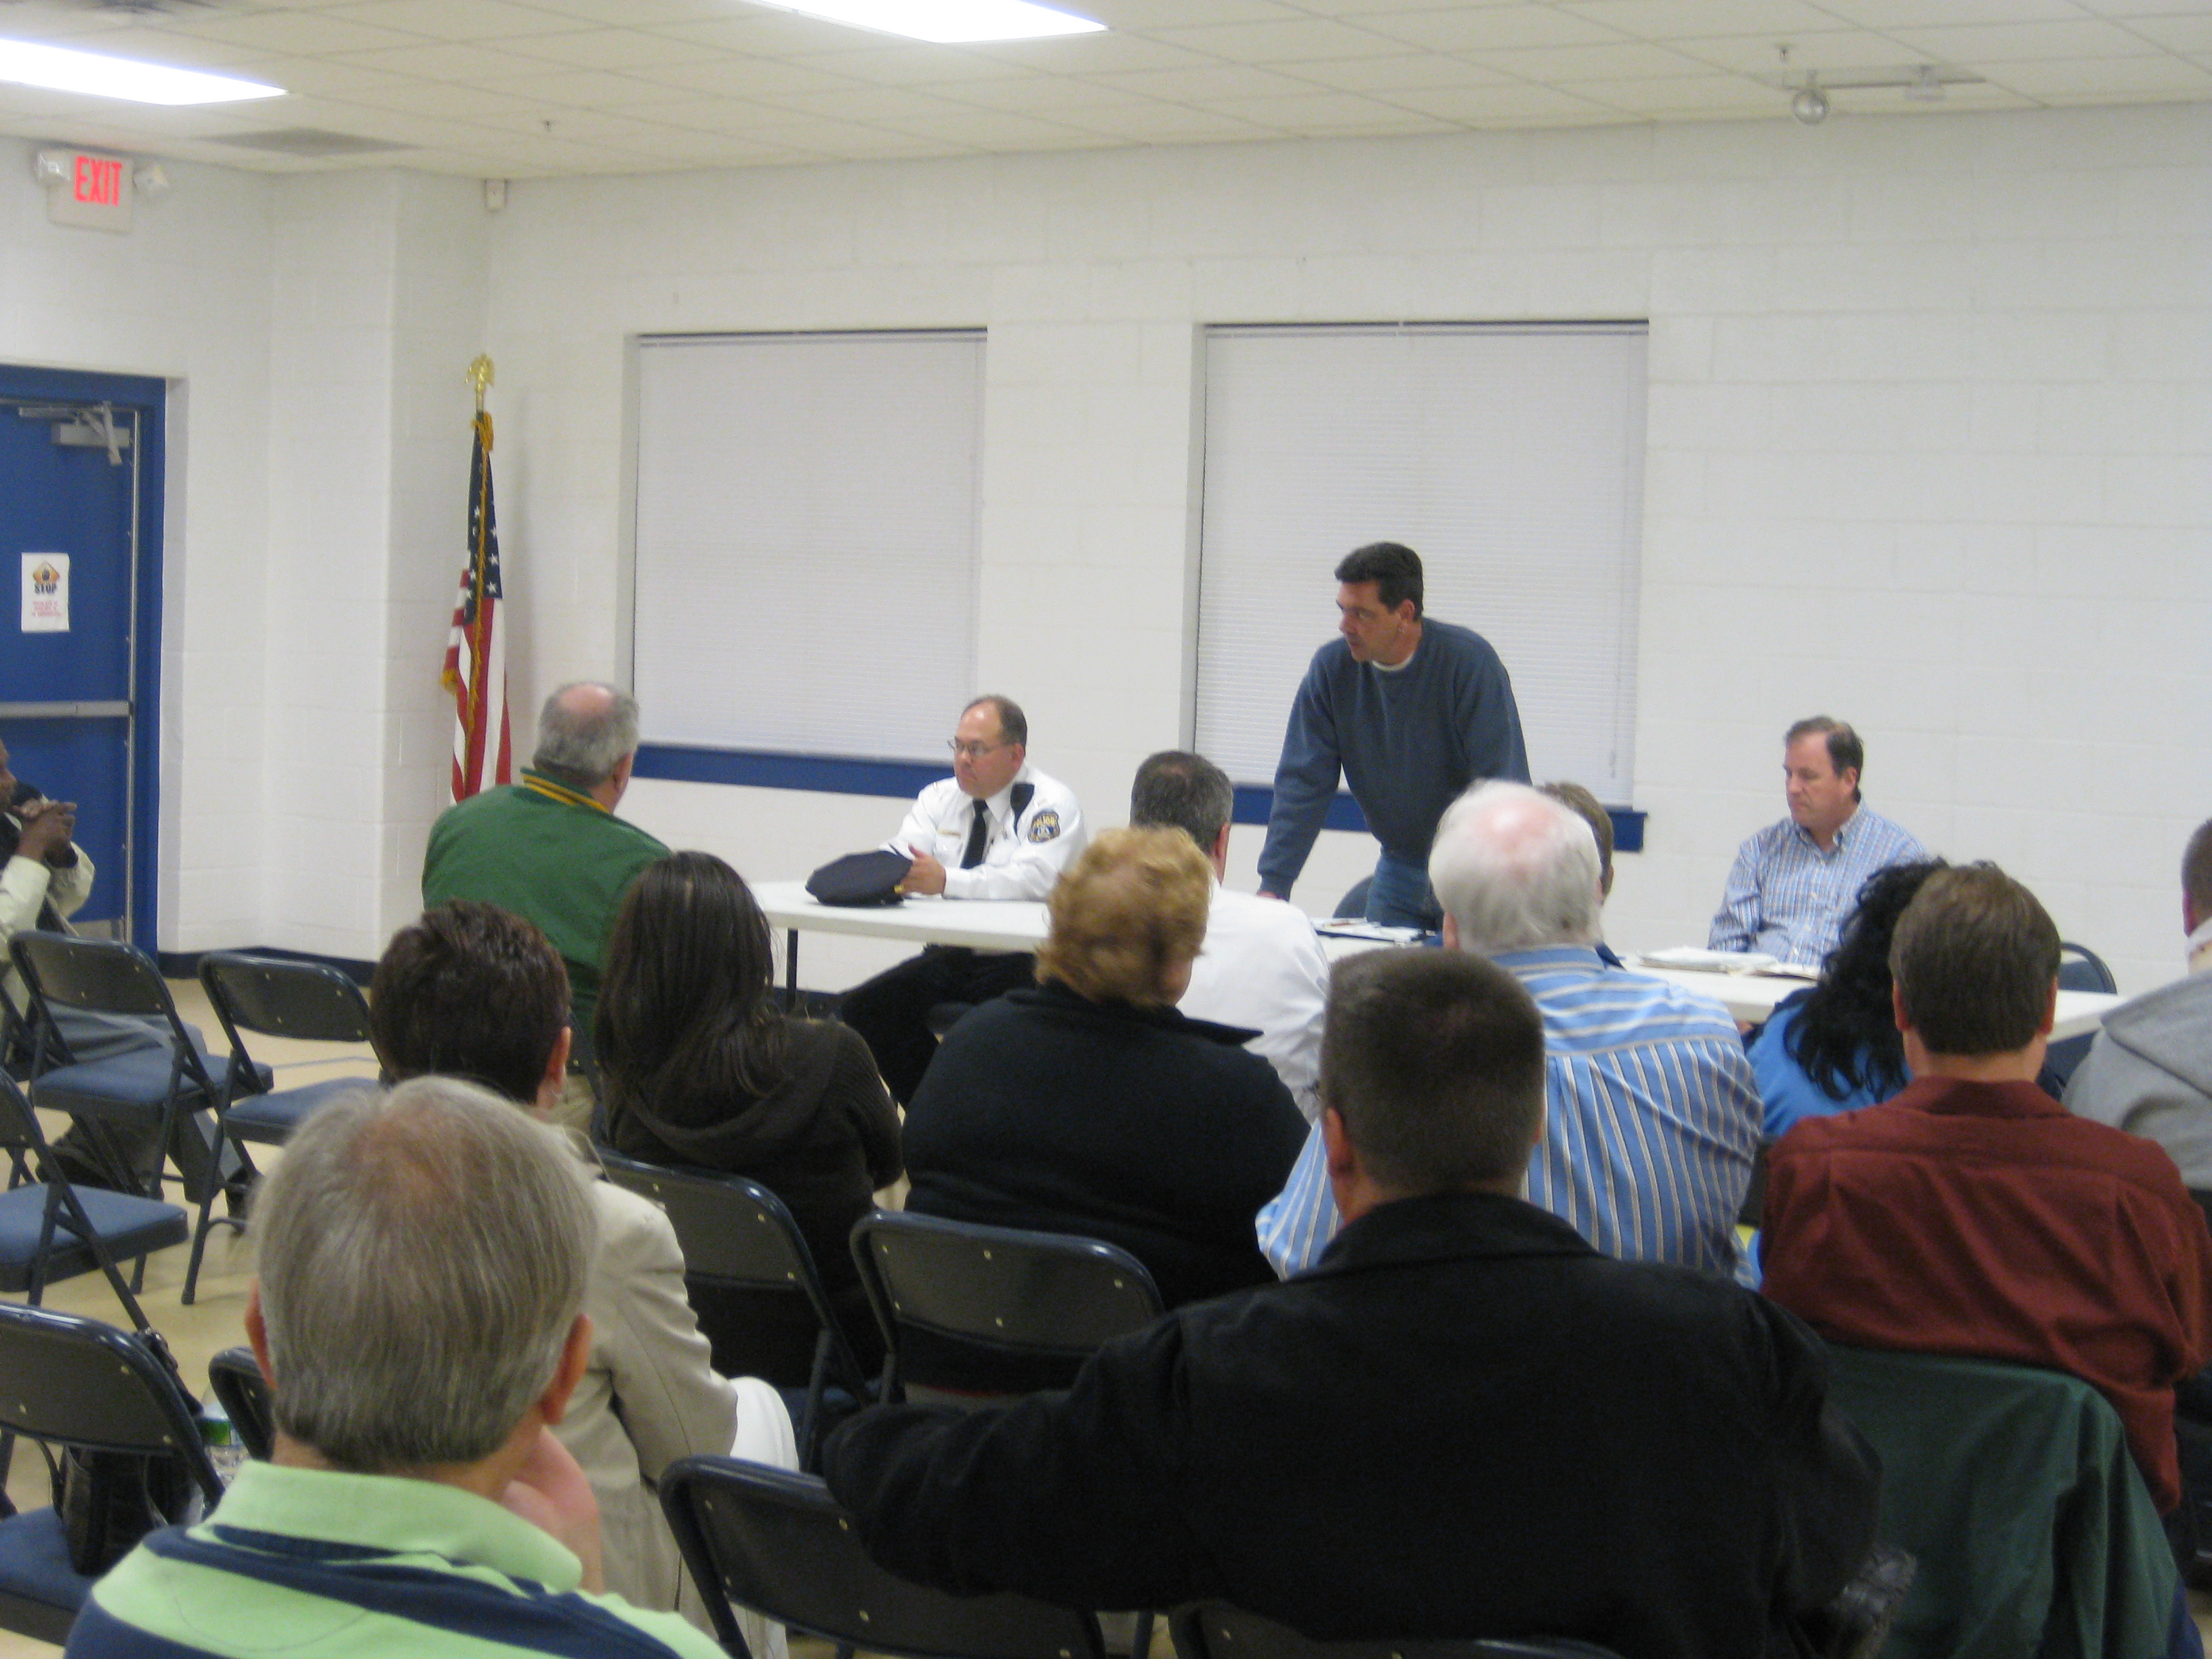 Mayfair Town Watch president John Vearling (center) takes suggestions from members of the newly formed group.